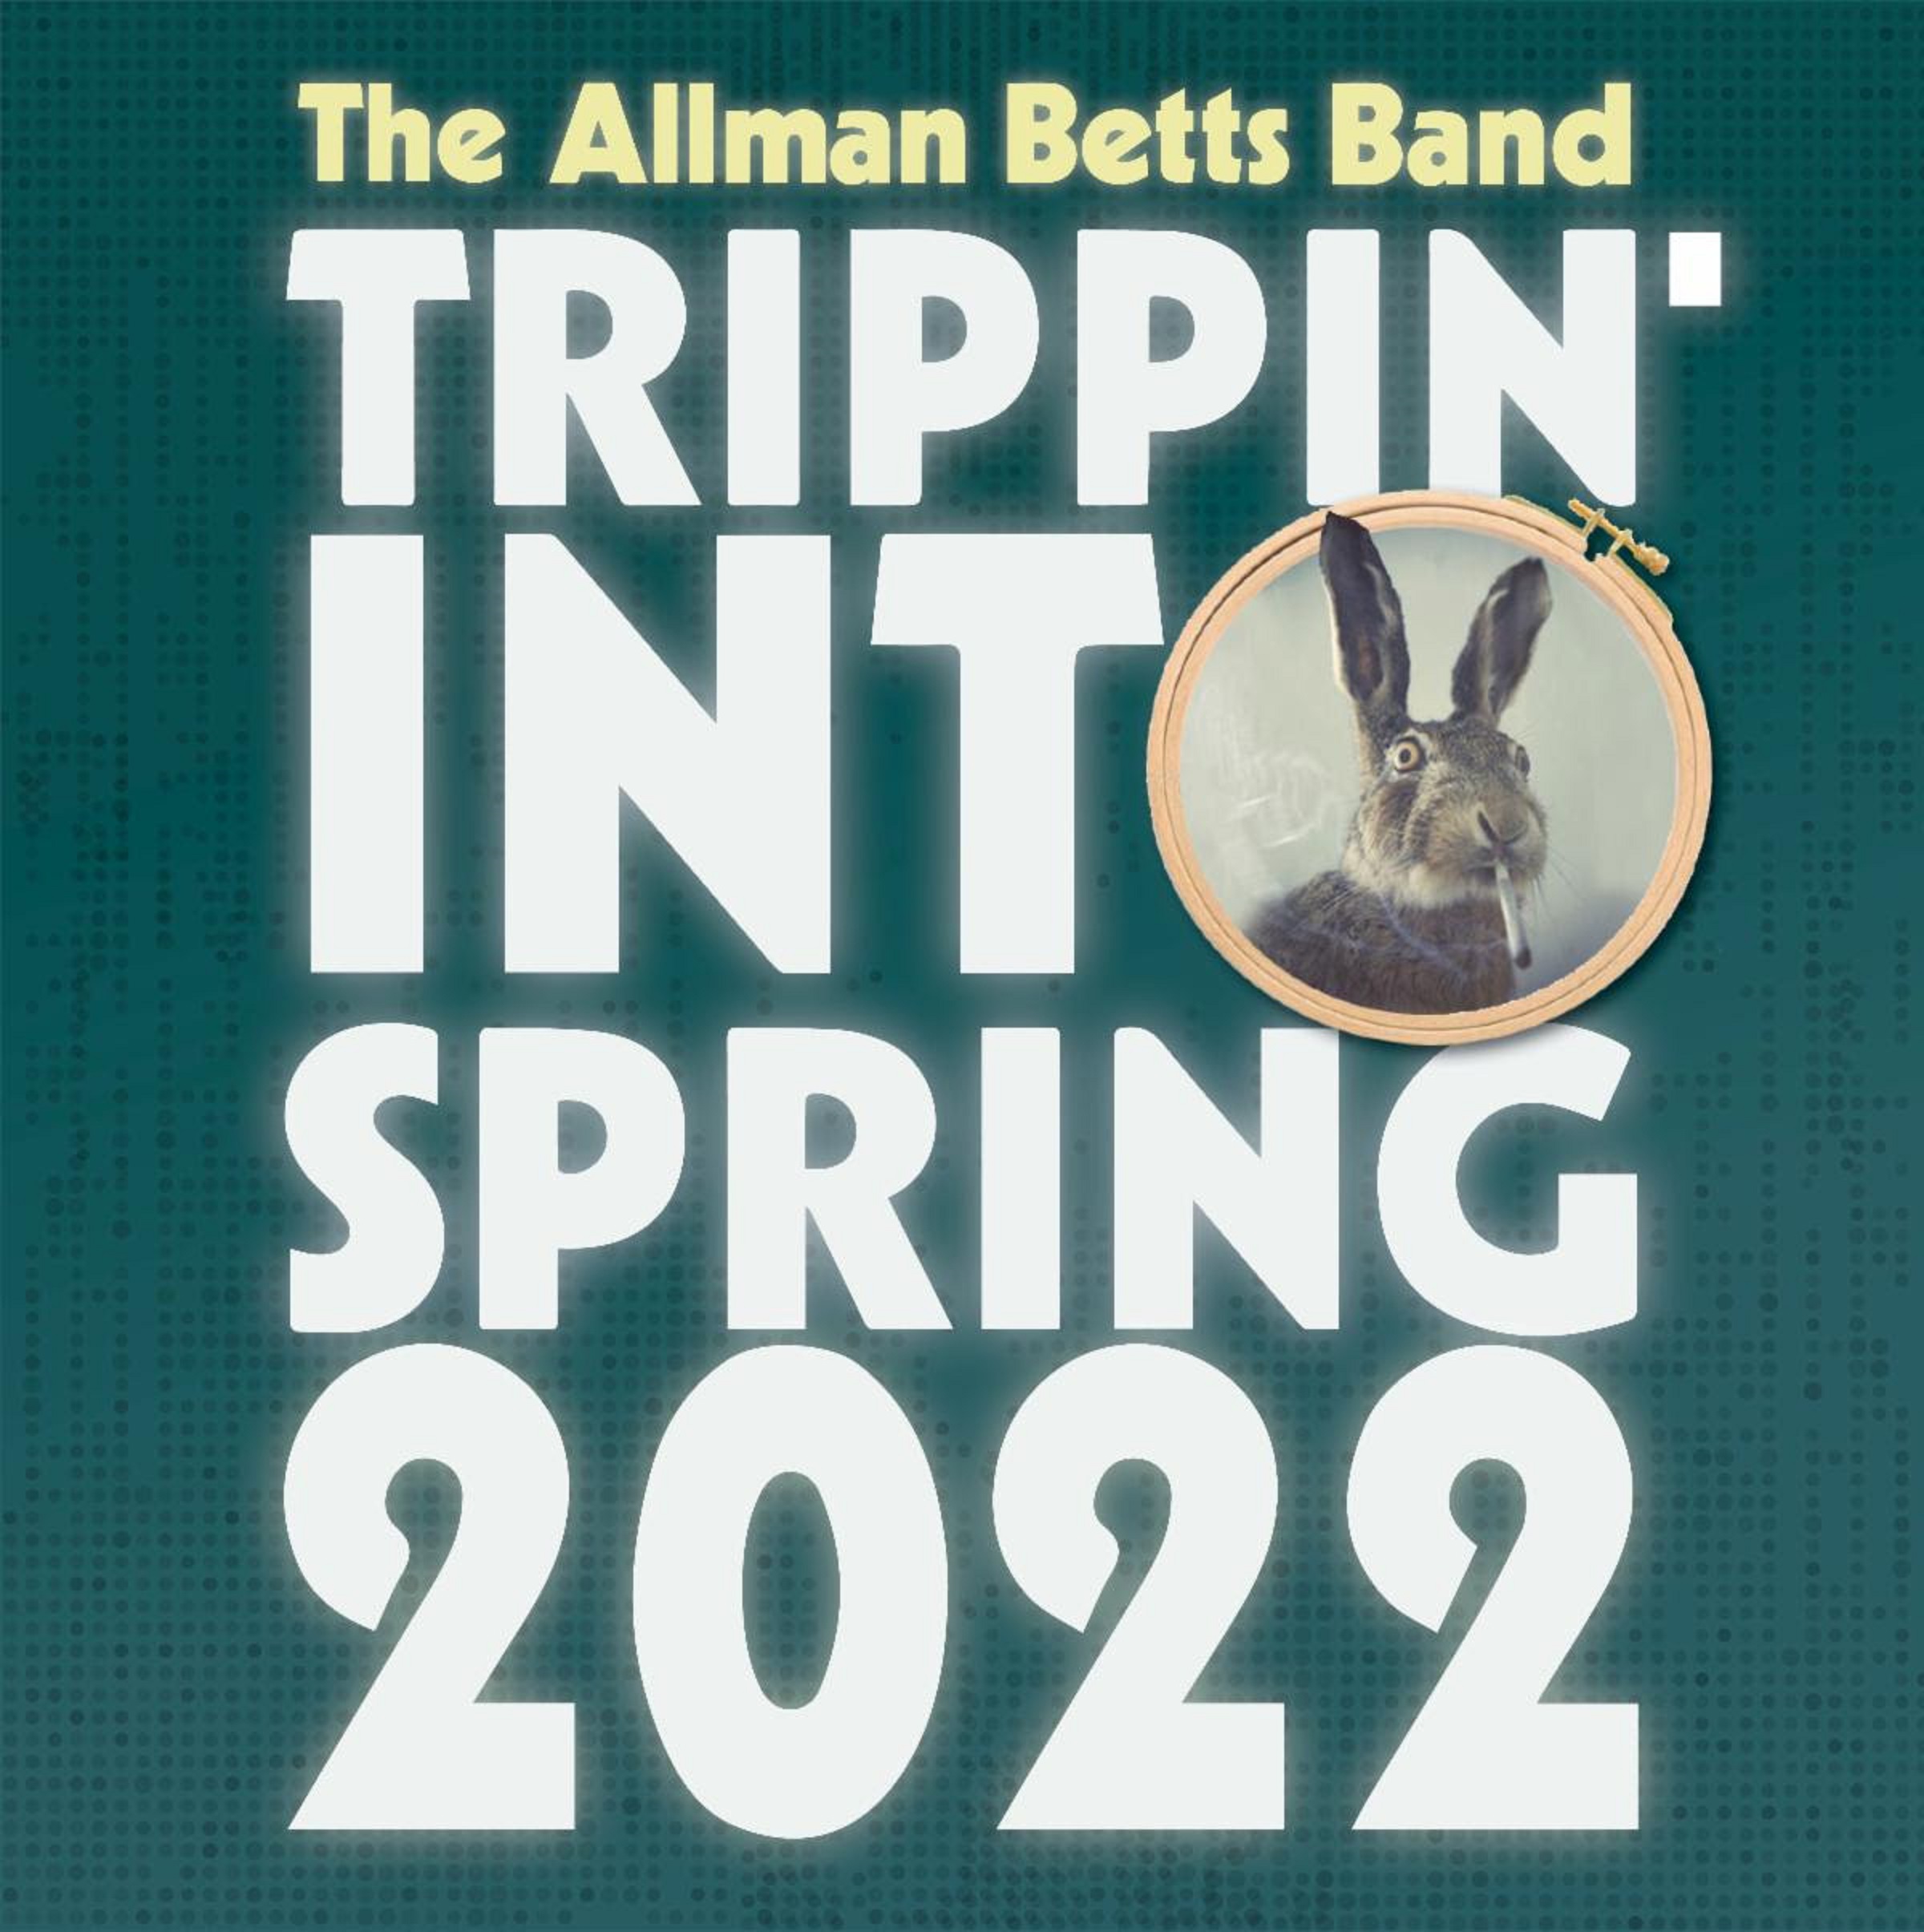 The Allman Betts Band announce 'Trippin Into Spring 2022' tour